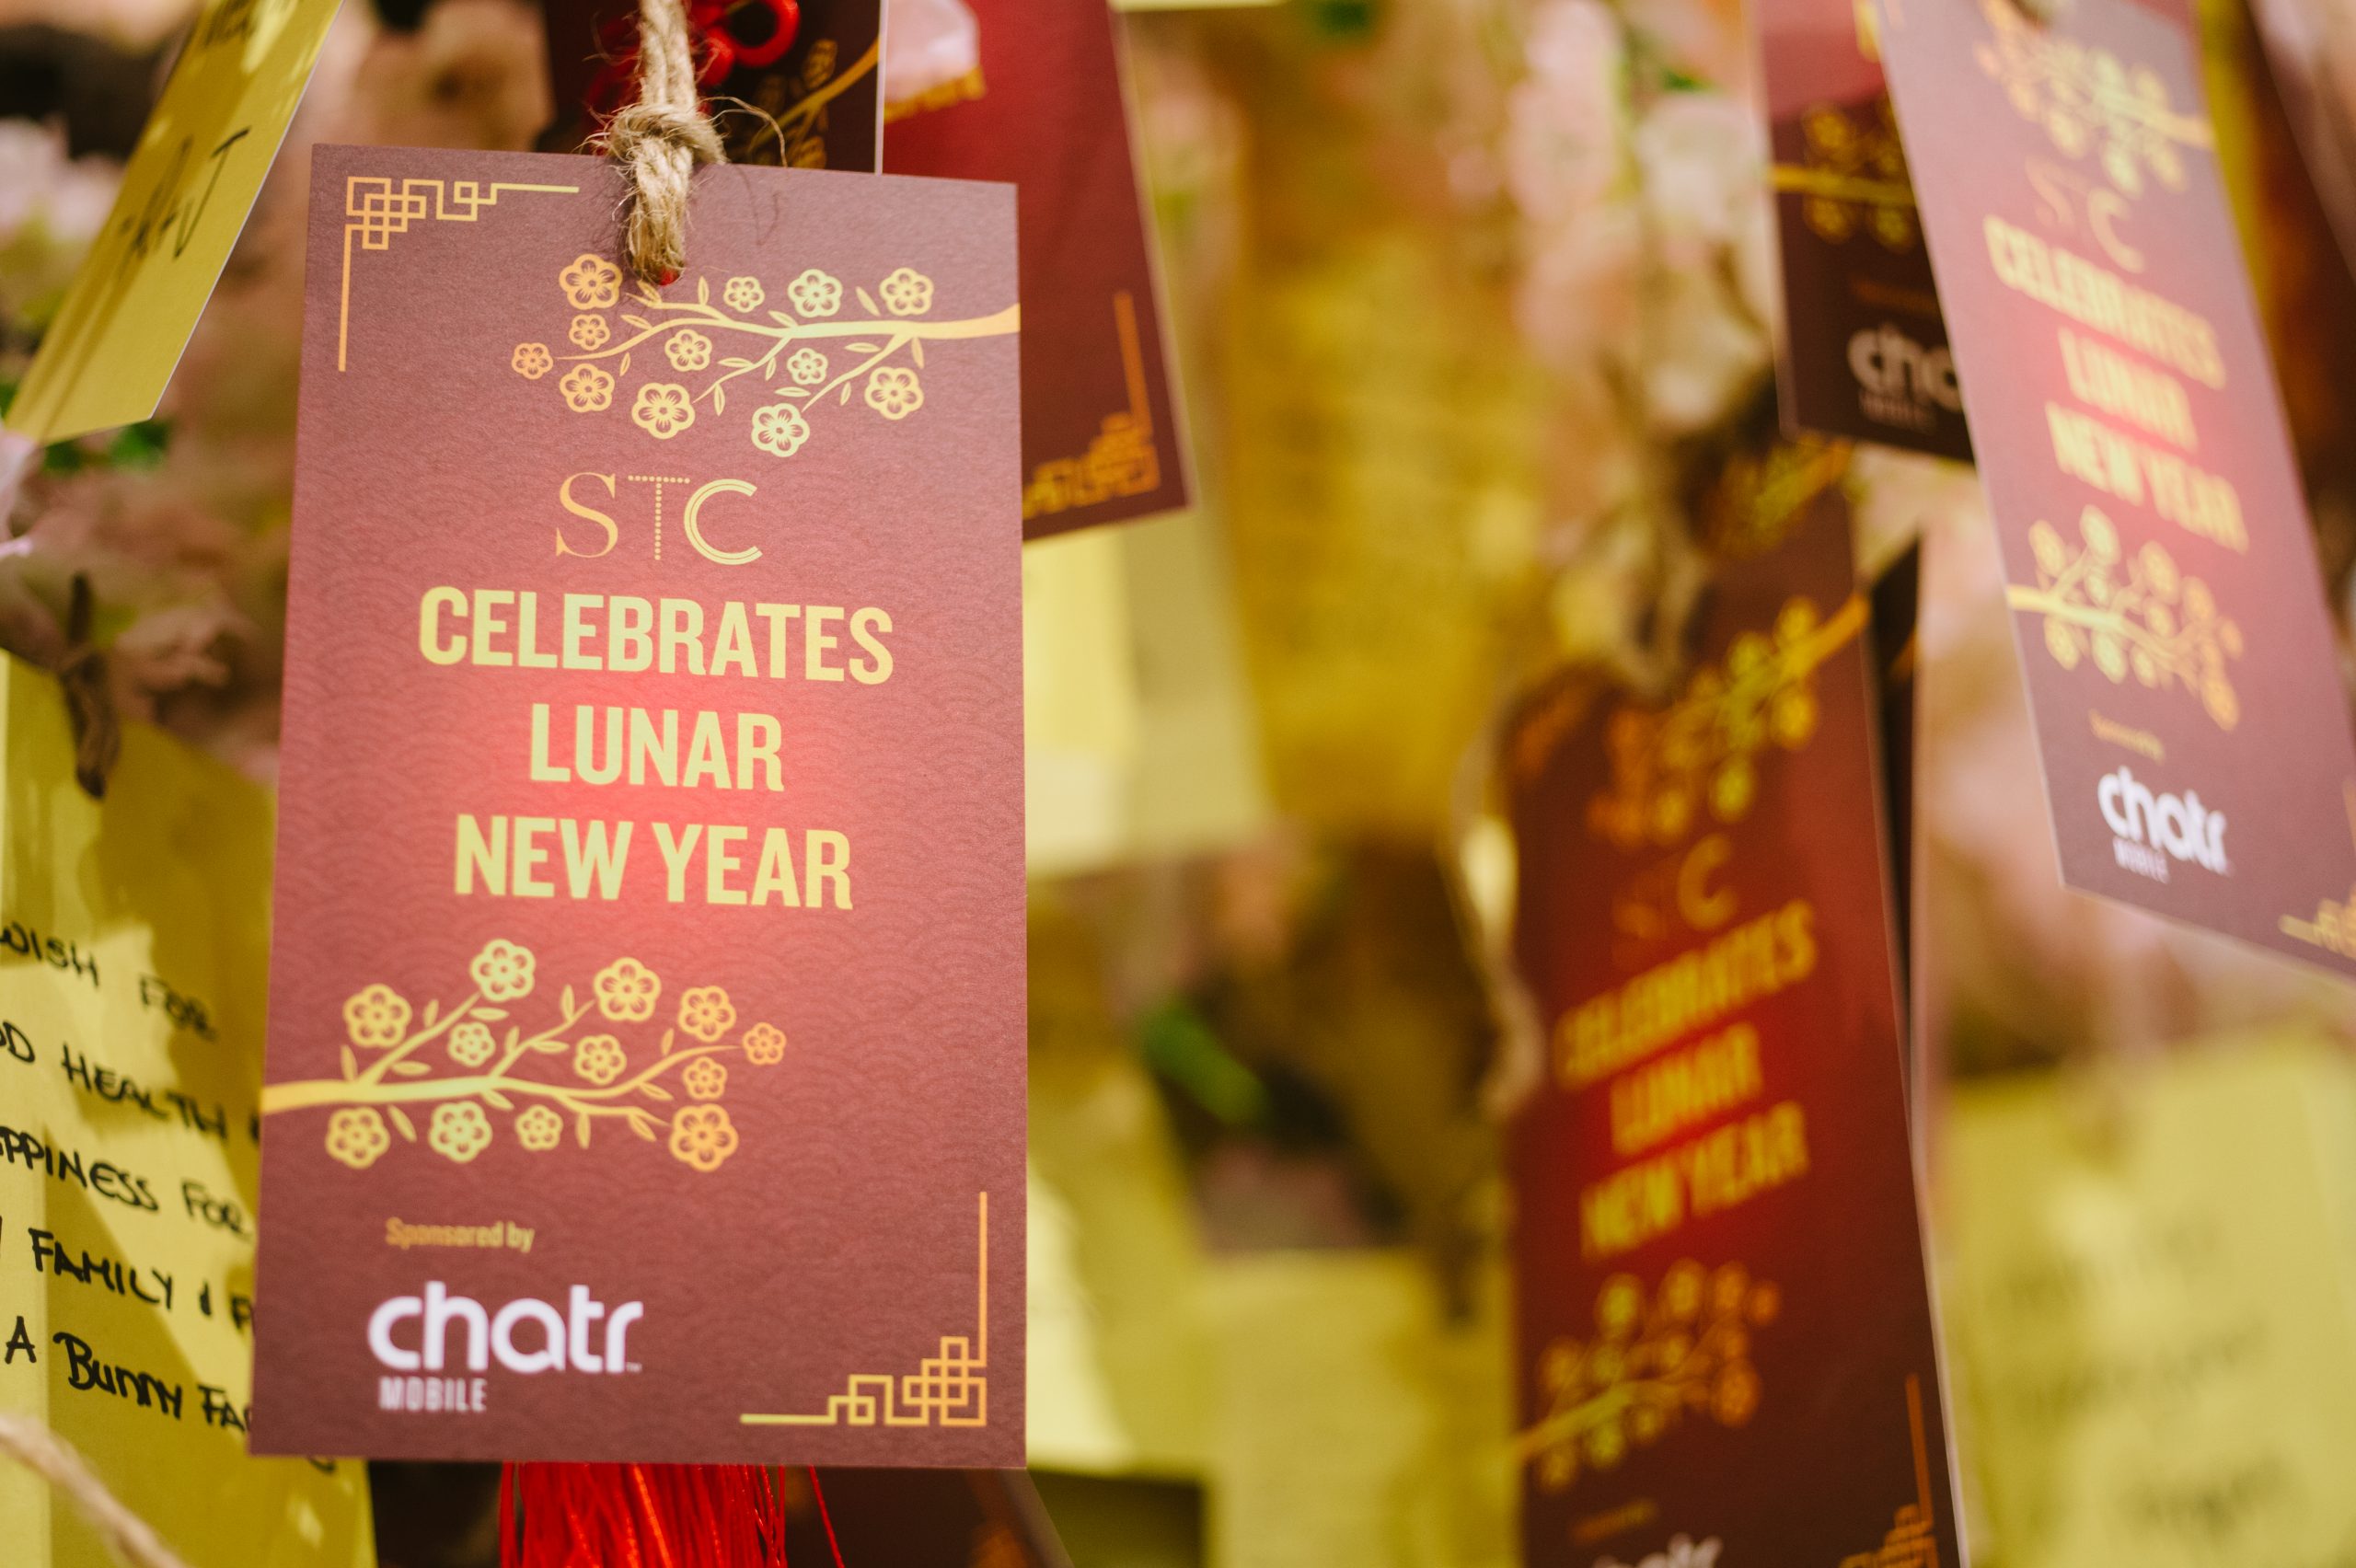 STC Lunar New Year Event